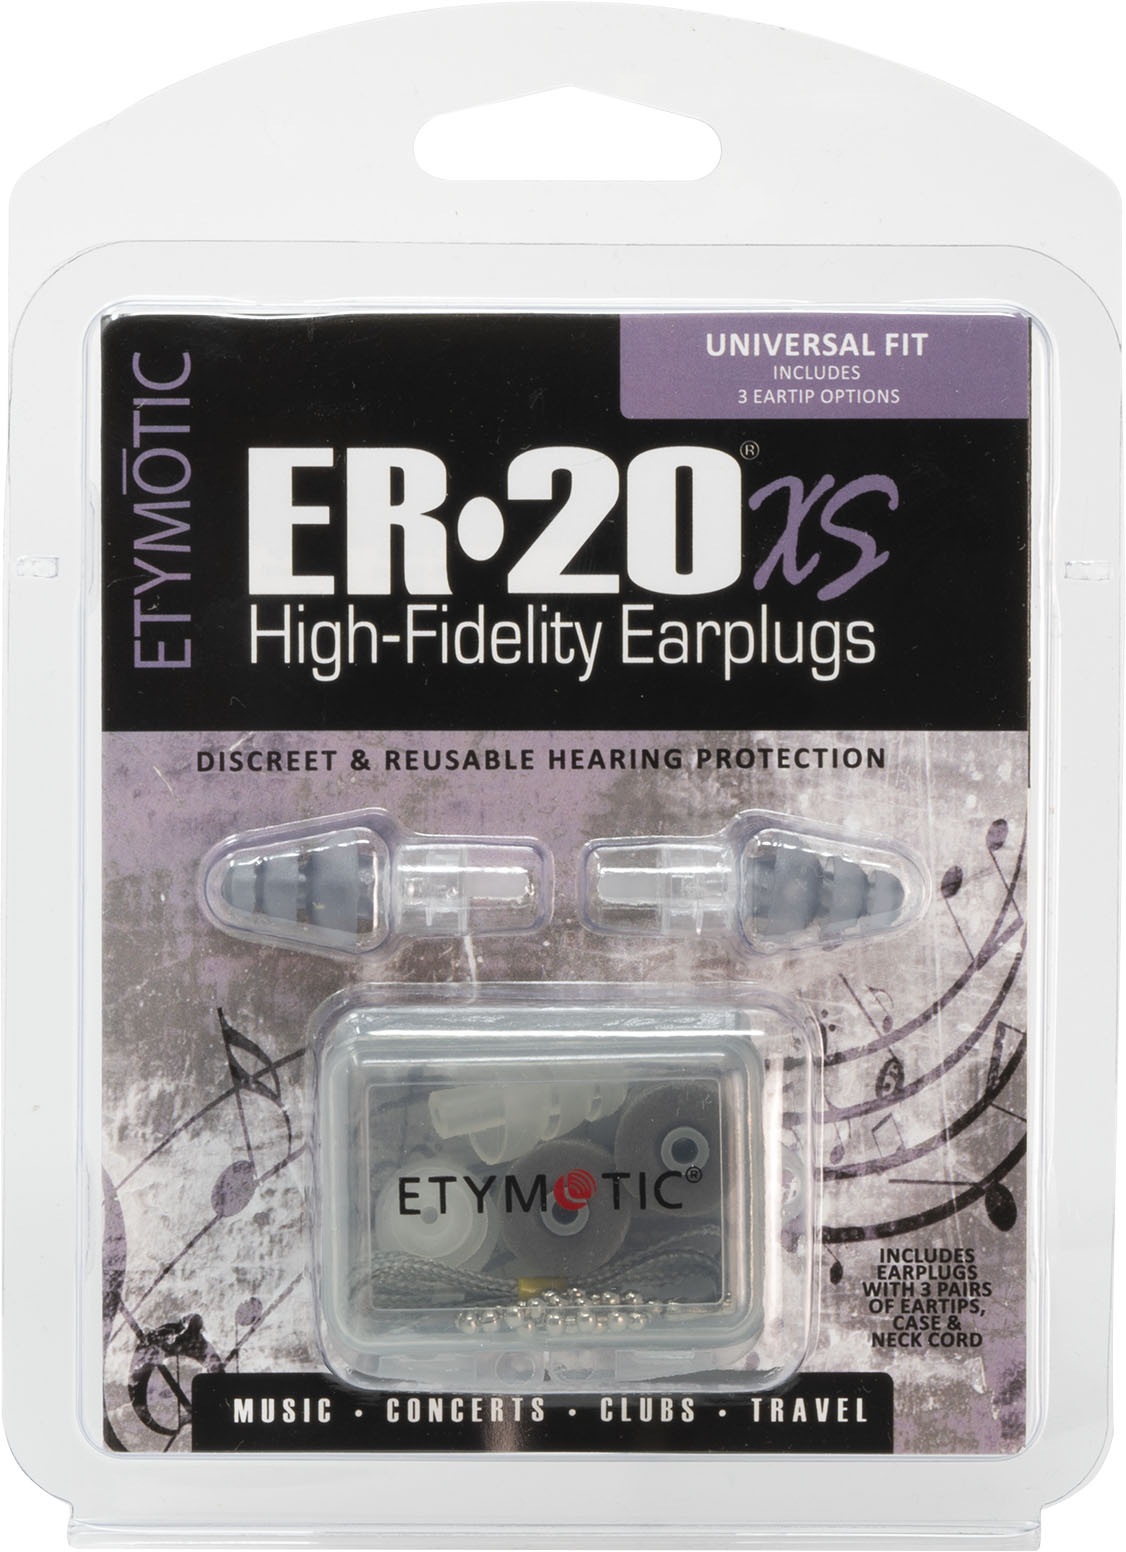 Best Festival Ear Plugs: Why Protecting Your Hearing Is Important